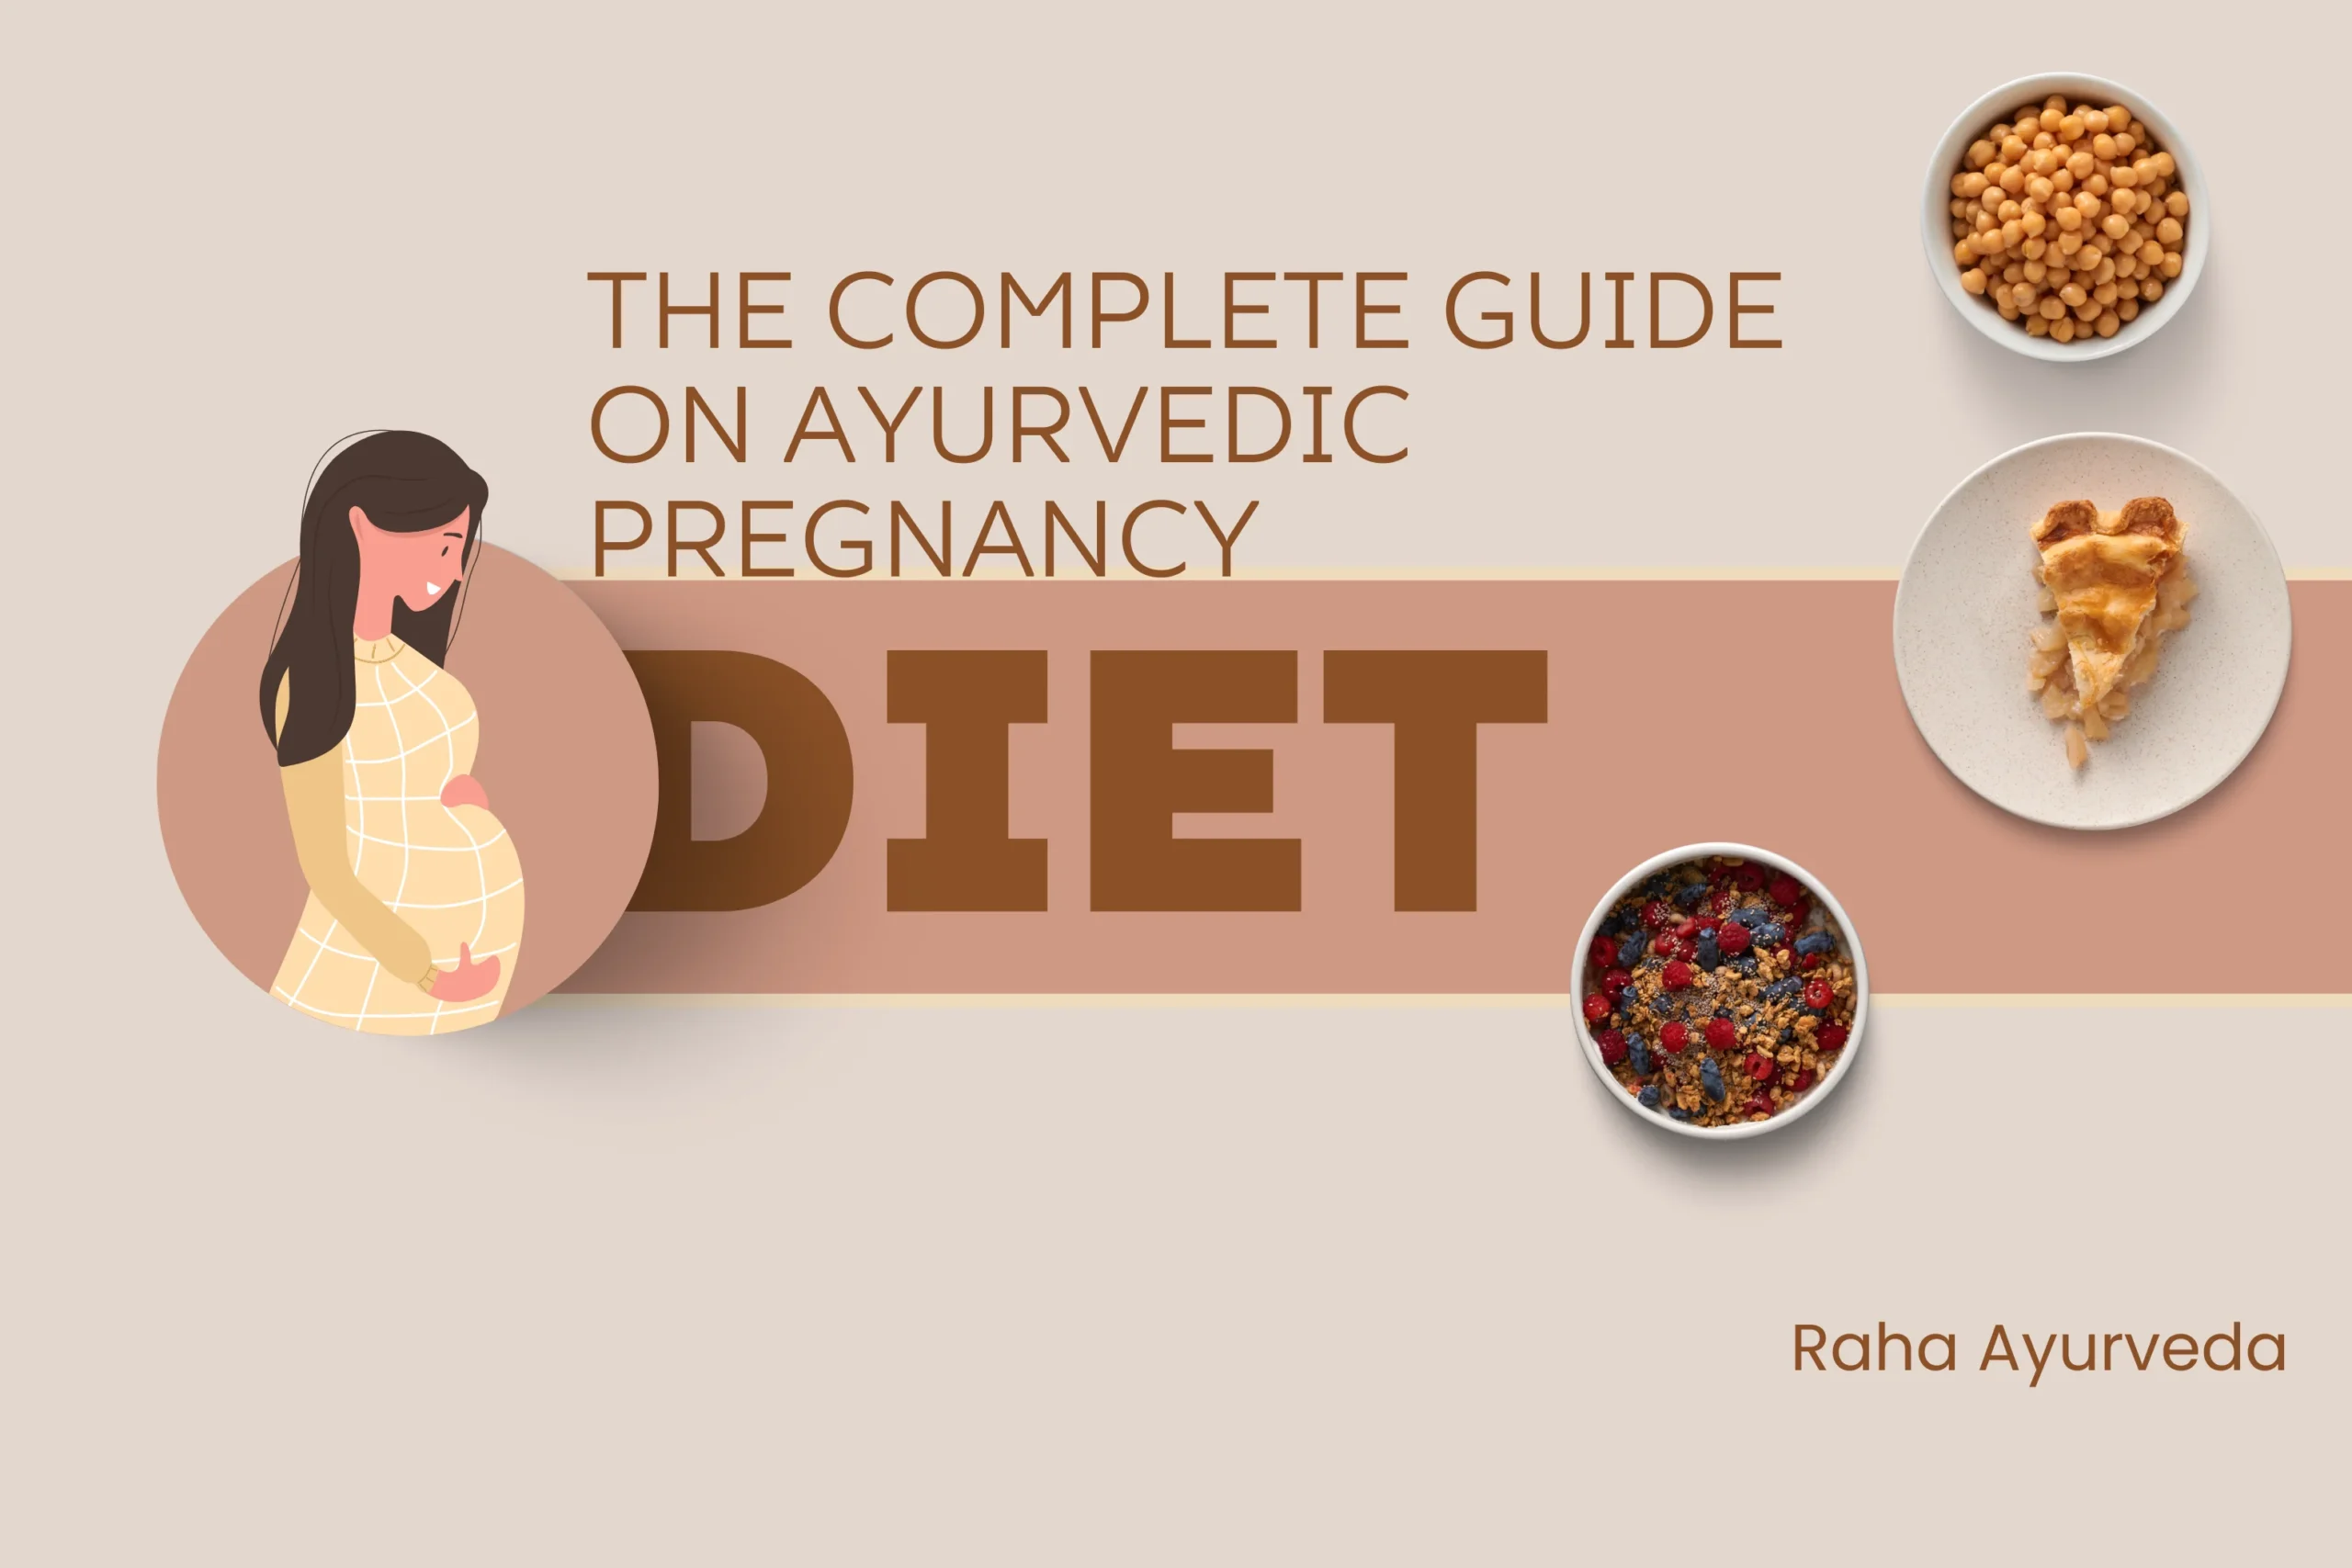 The Complete Guide on Ayurvedic Pregnancy Diet